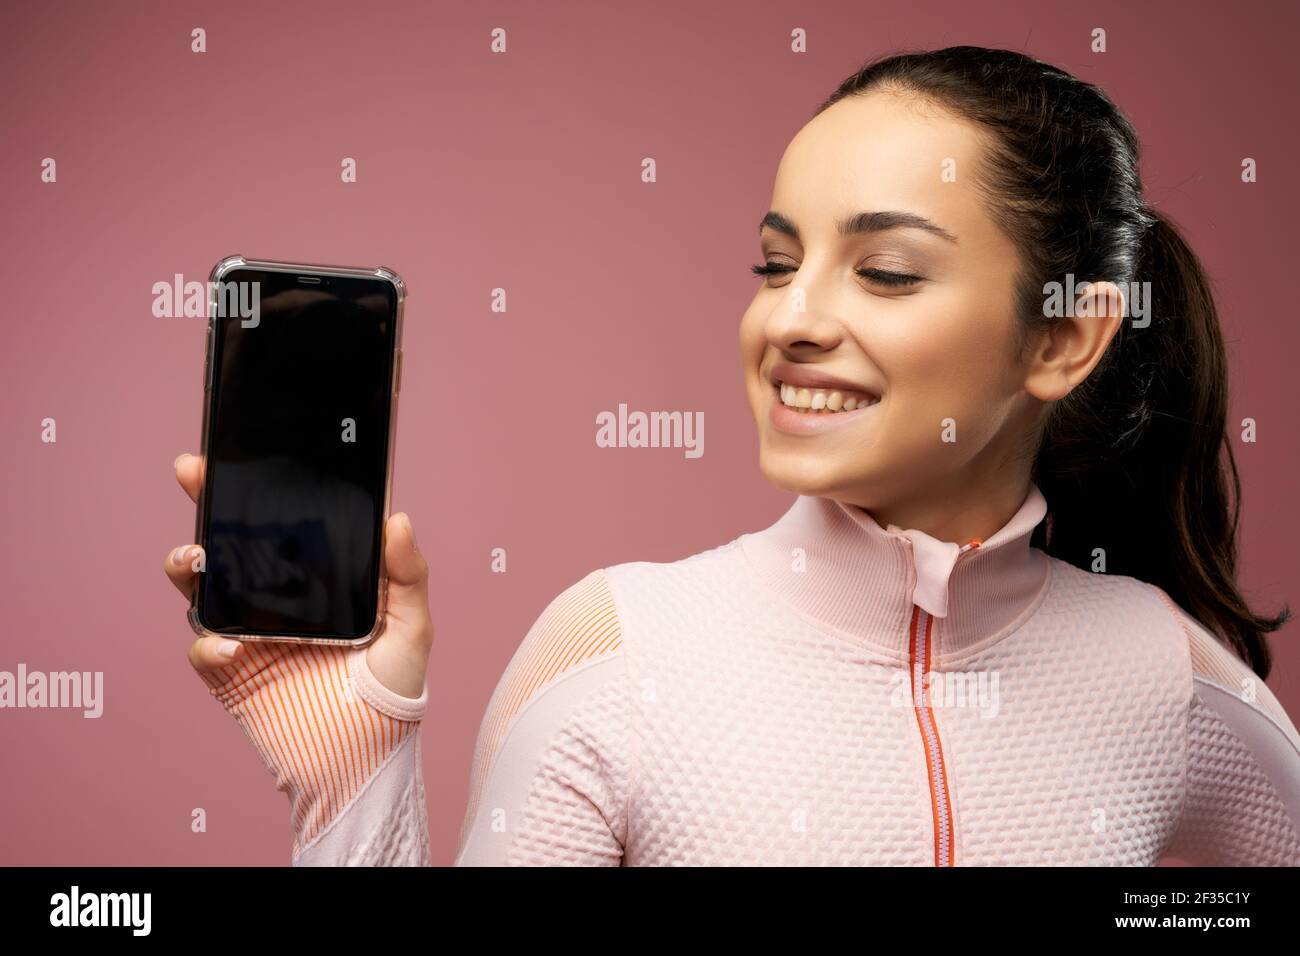 Cheerful young woman holding cellphone with black display Stock Photo